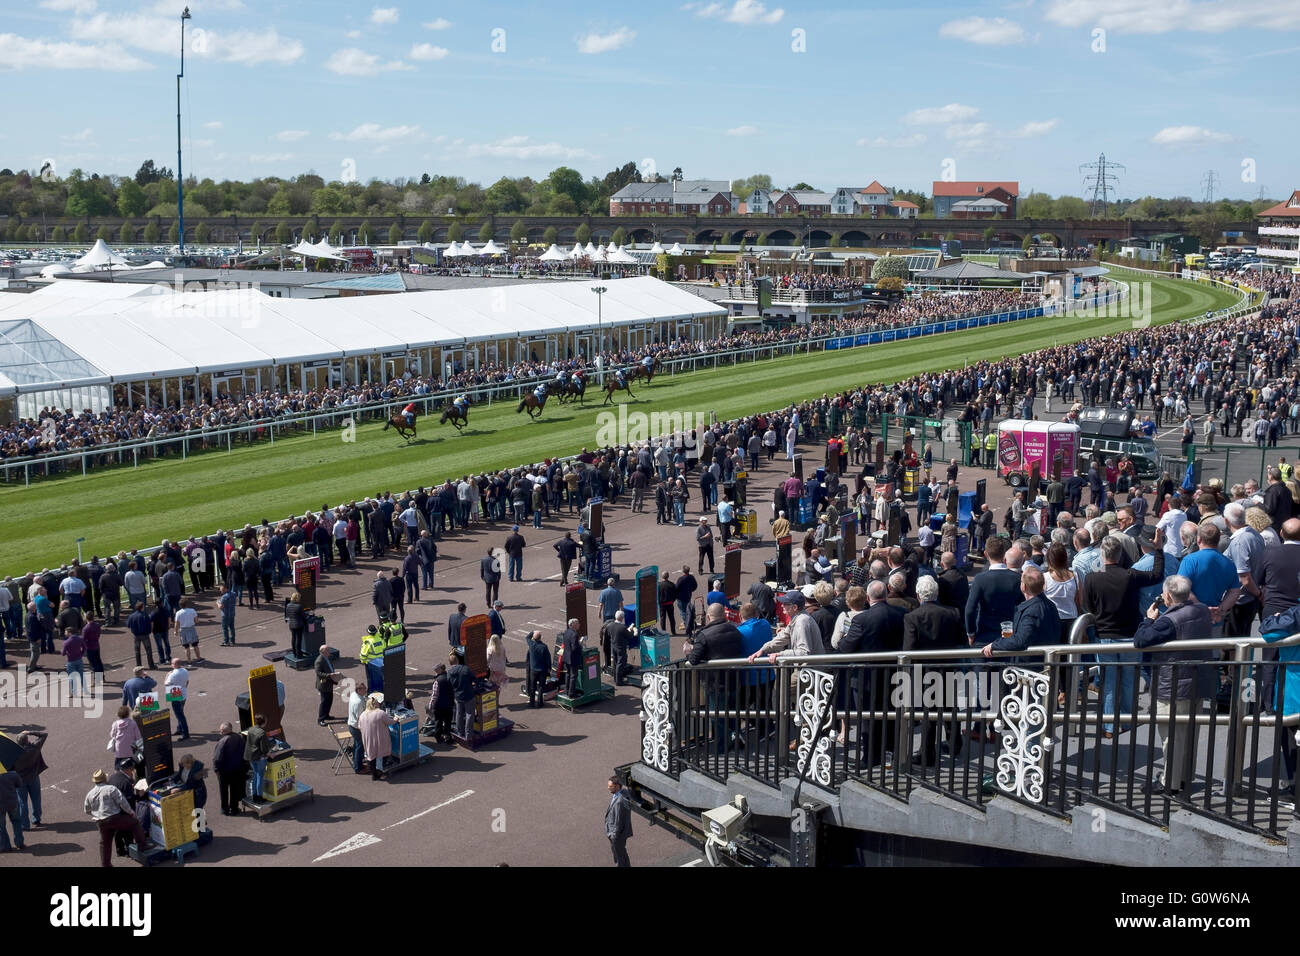 Chester, UK. 4th May, 2016. Chester Races. The first race of the first meeting of the 2016 season at Chester Race Course with spectators enjoying the warm and sunny spring weather. Credit:  Andrew Paterson/Alamy Live News Stock Photo